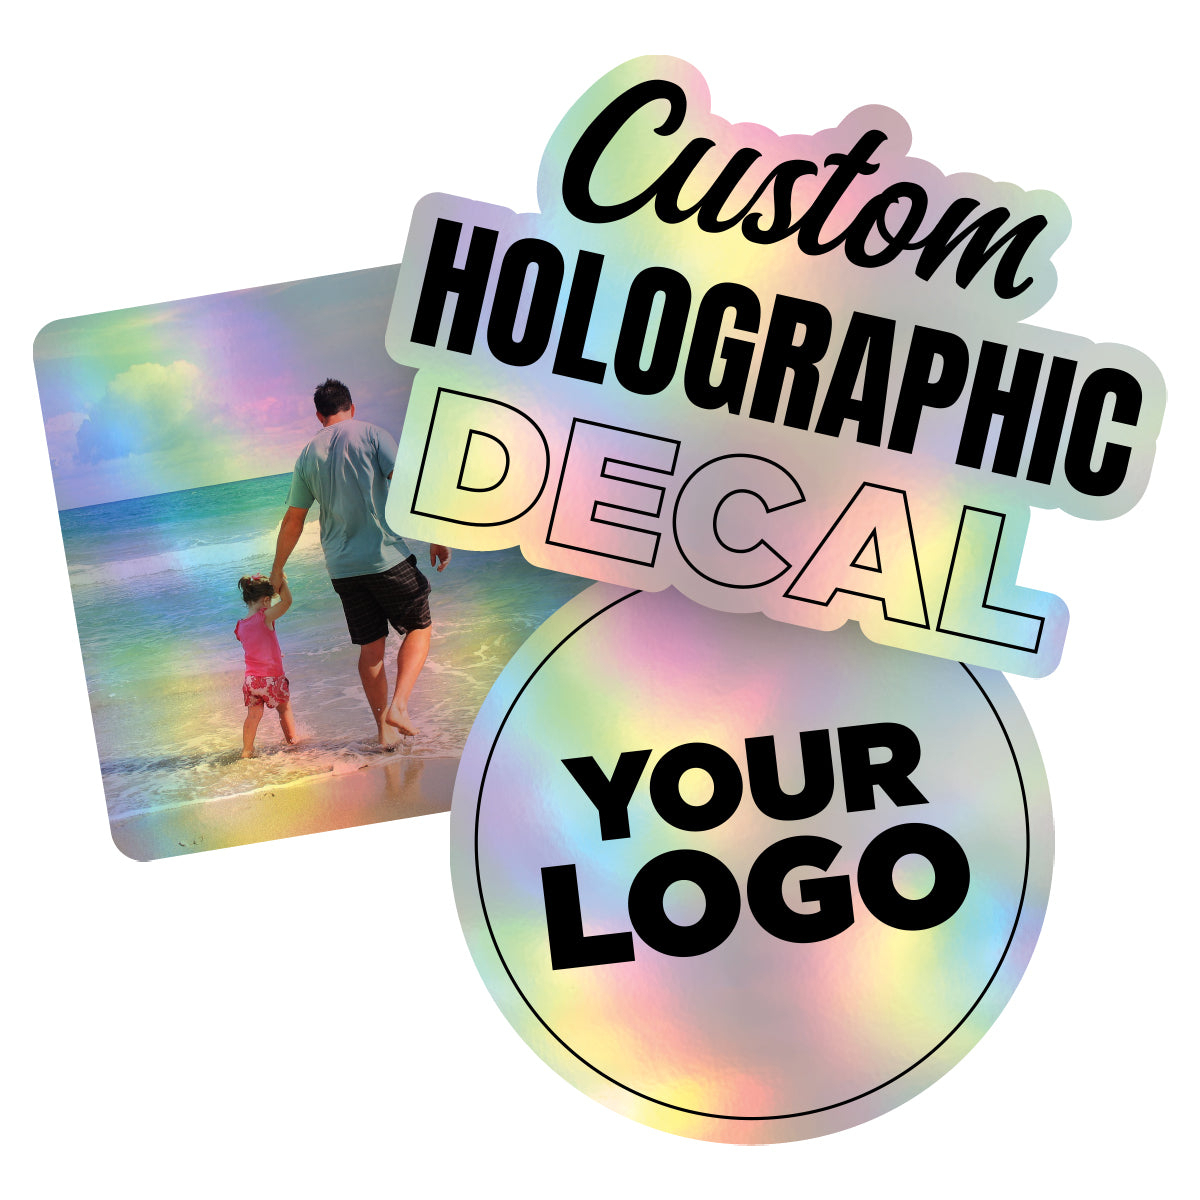 Personalized Holographic Vinyl Sticker Decal Custom Made Any Logo, Image, Text, Or Name Die Cut To Shape - 25 Pack, 8 Inch, Square